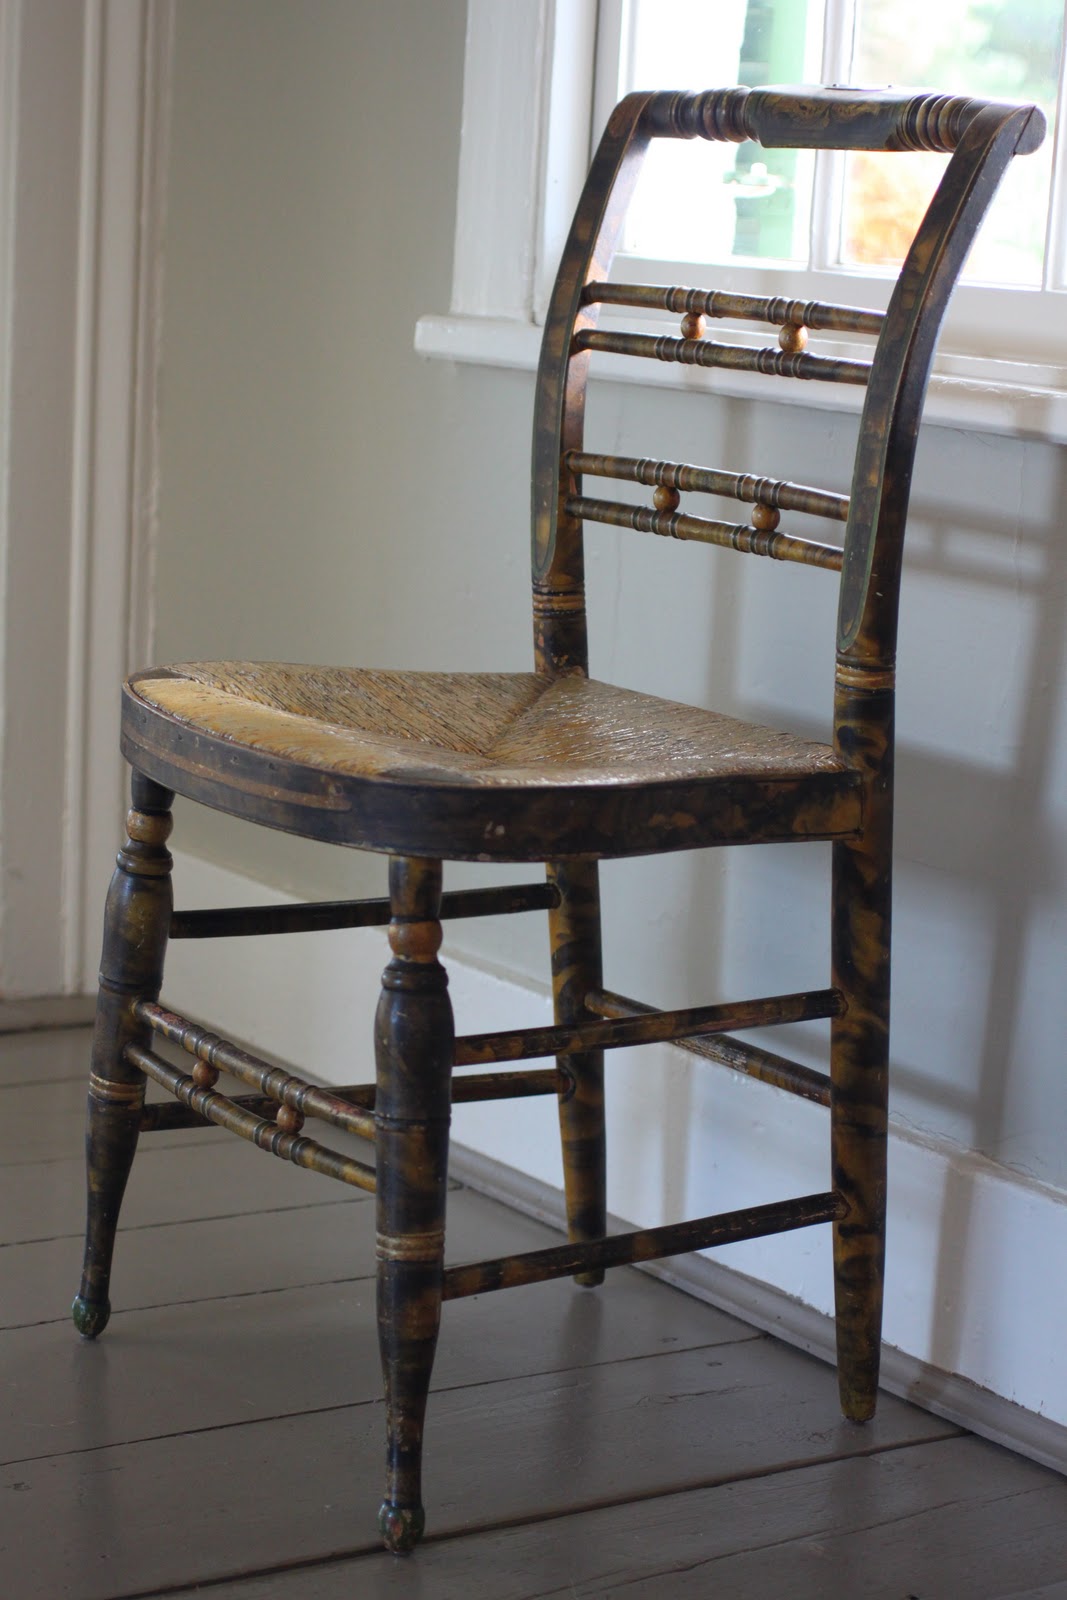 The Flawed Masterpiece: A Too-Short Antique Chair at Auction